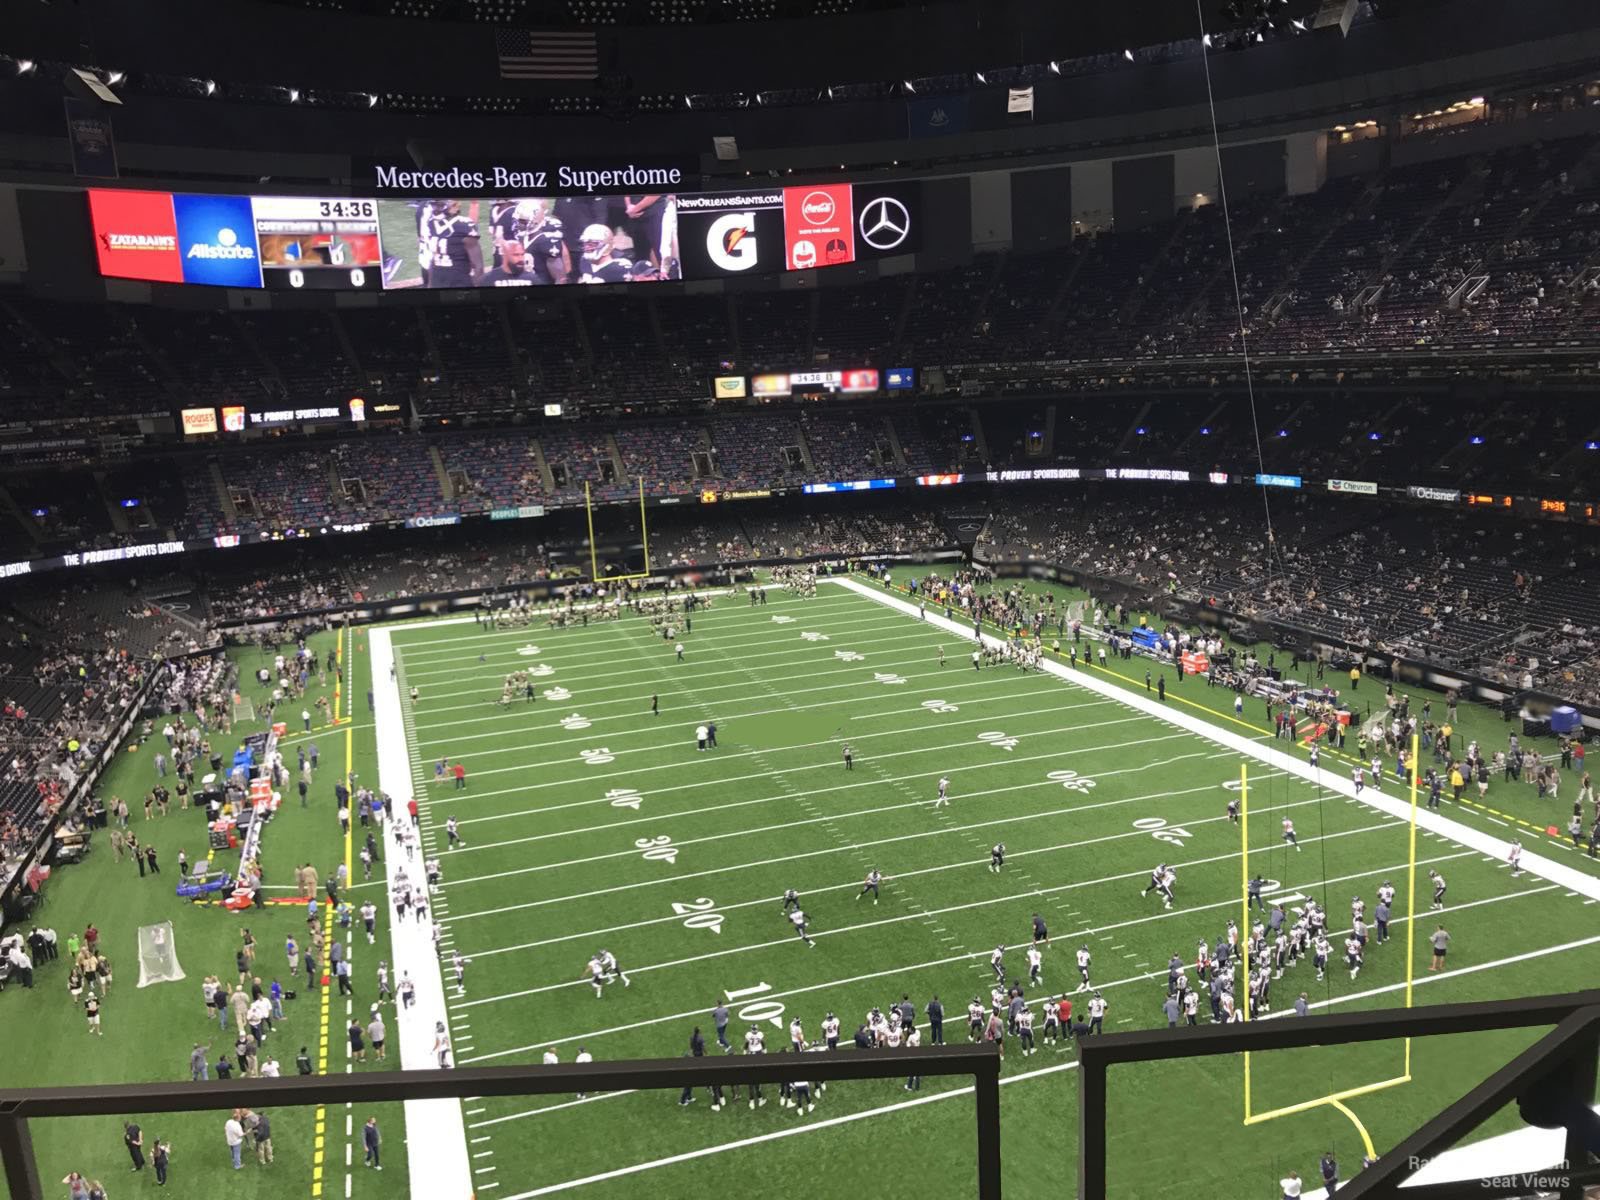 section 503, row 3 seat view  for football - caesars superdome